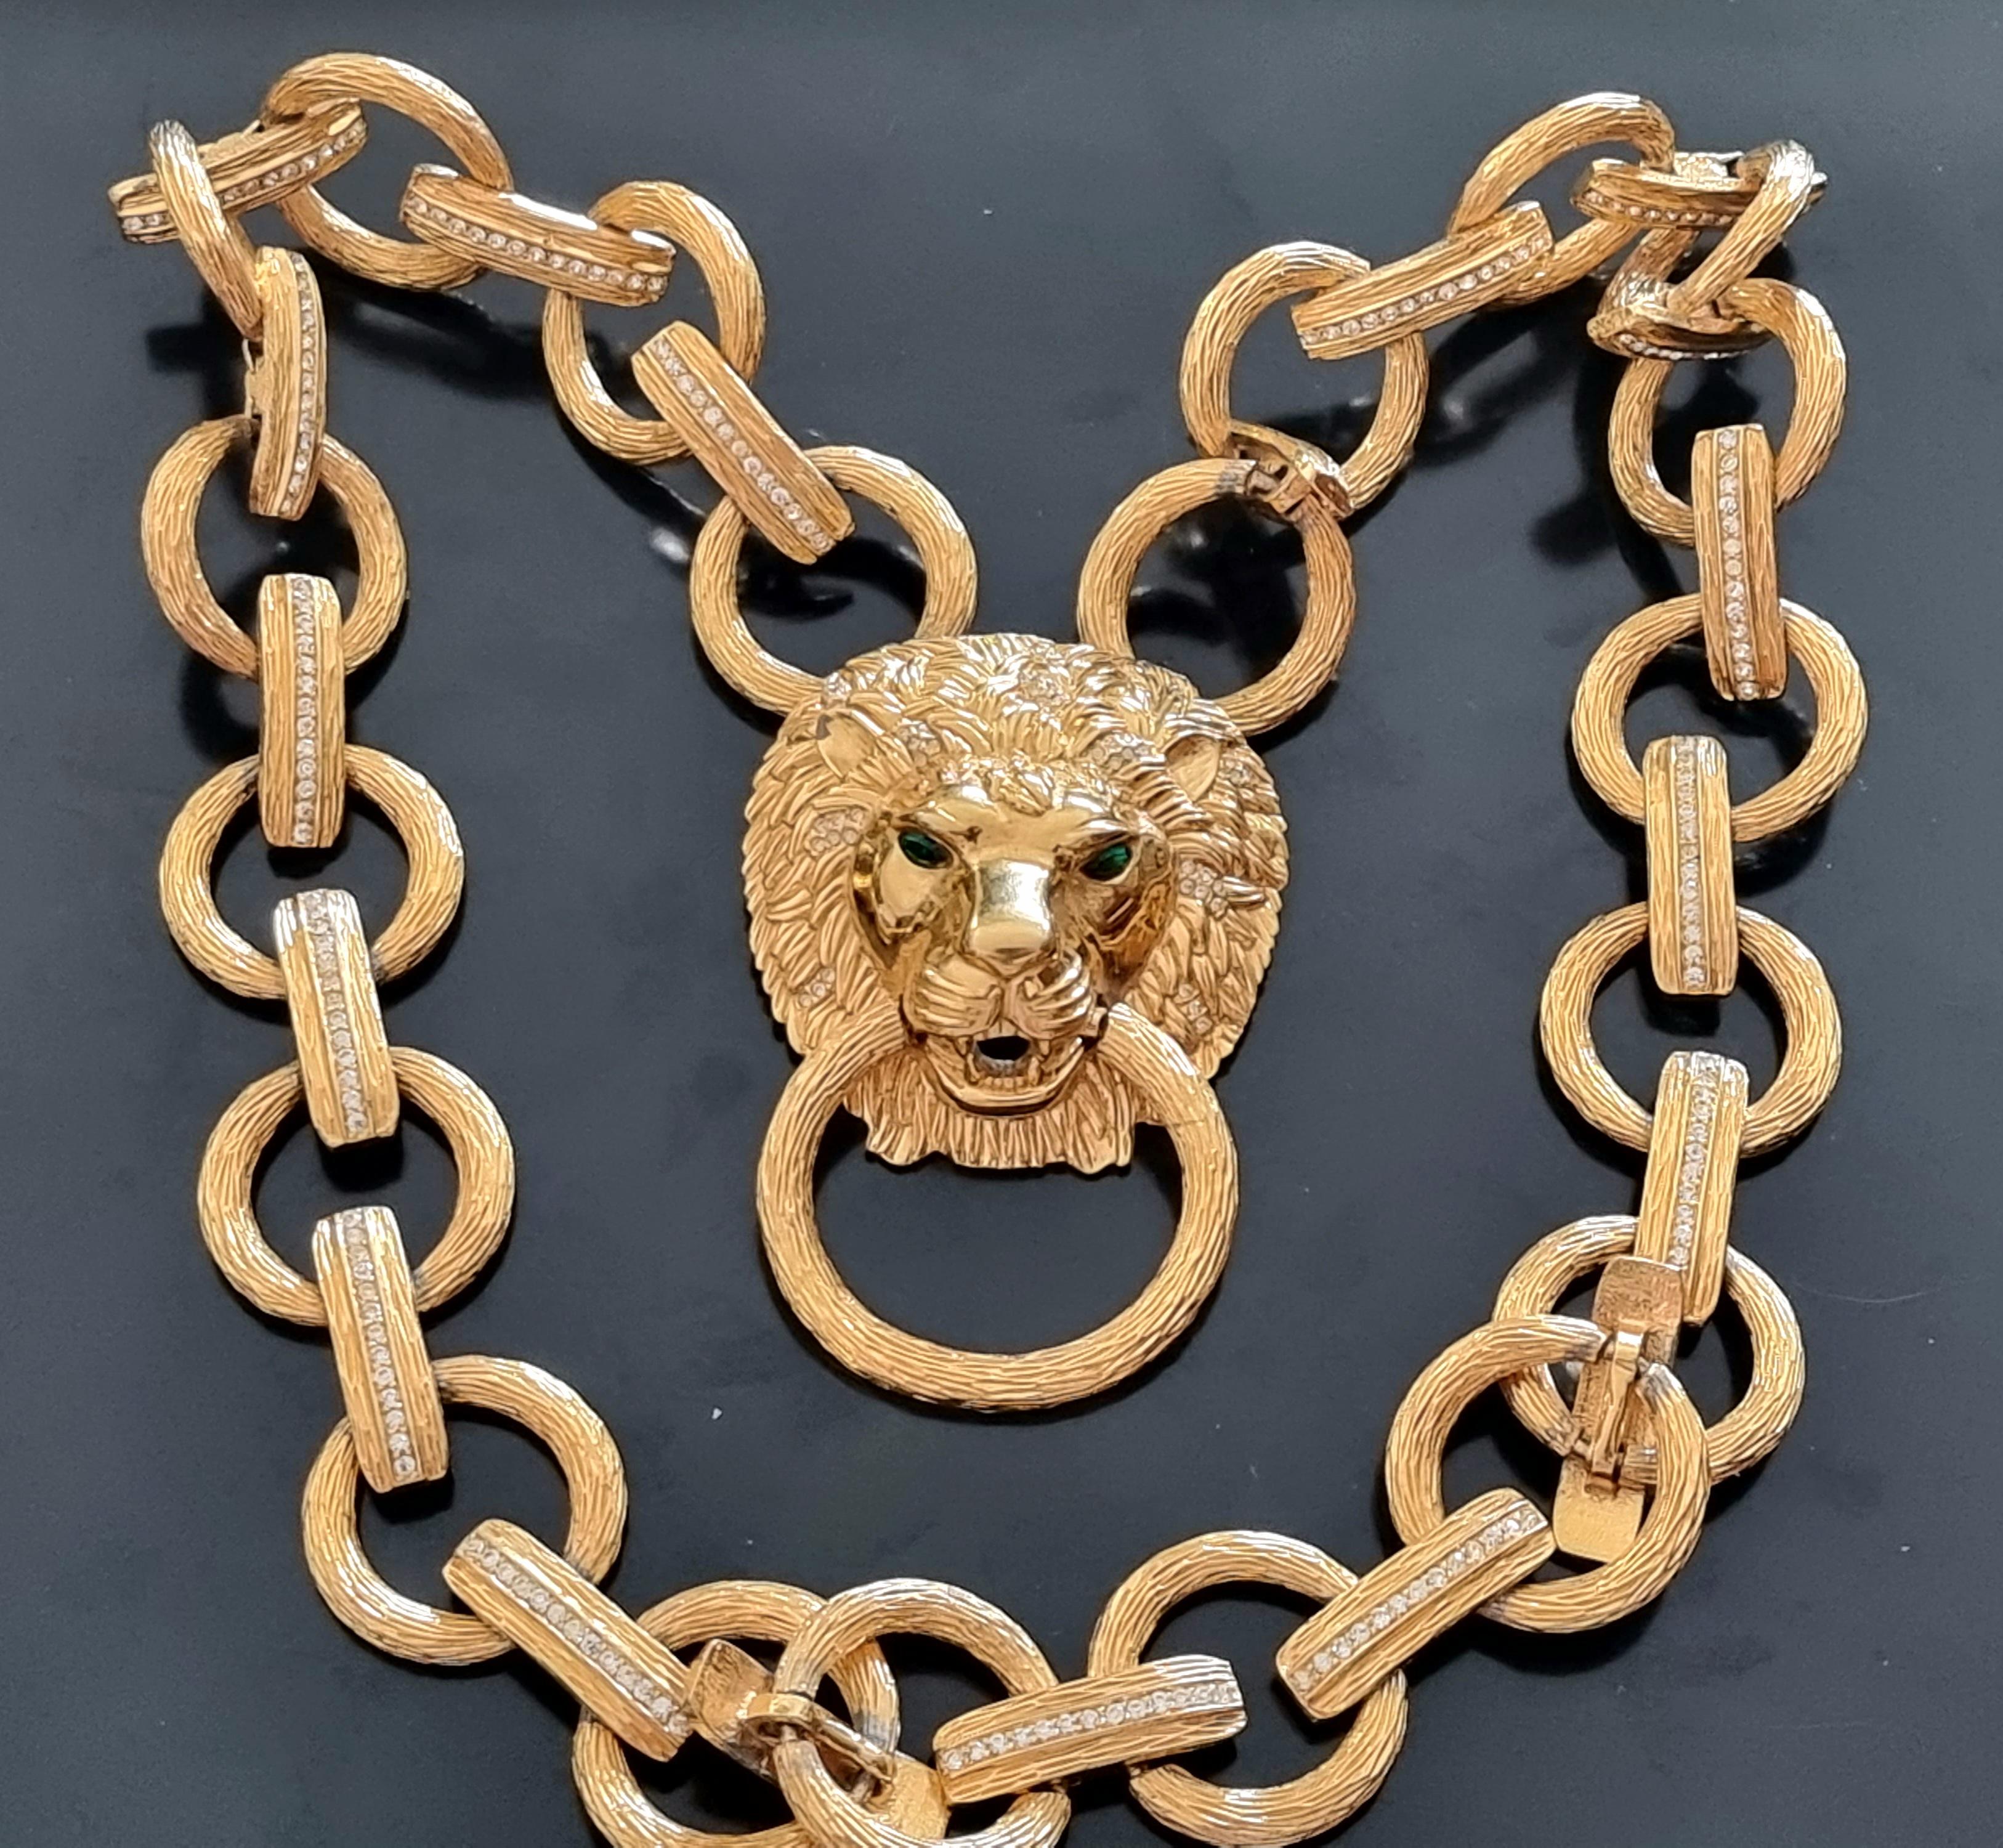 Massive ORLAN SAUTOIR NECKLACE,
80s vintage,
signed D'ORLAN, numbered 2322,
golden metal, rhinestones,
length 68 cm, weight 250 g (quite heavy),
